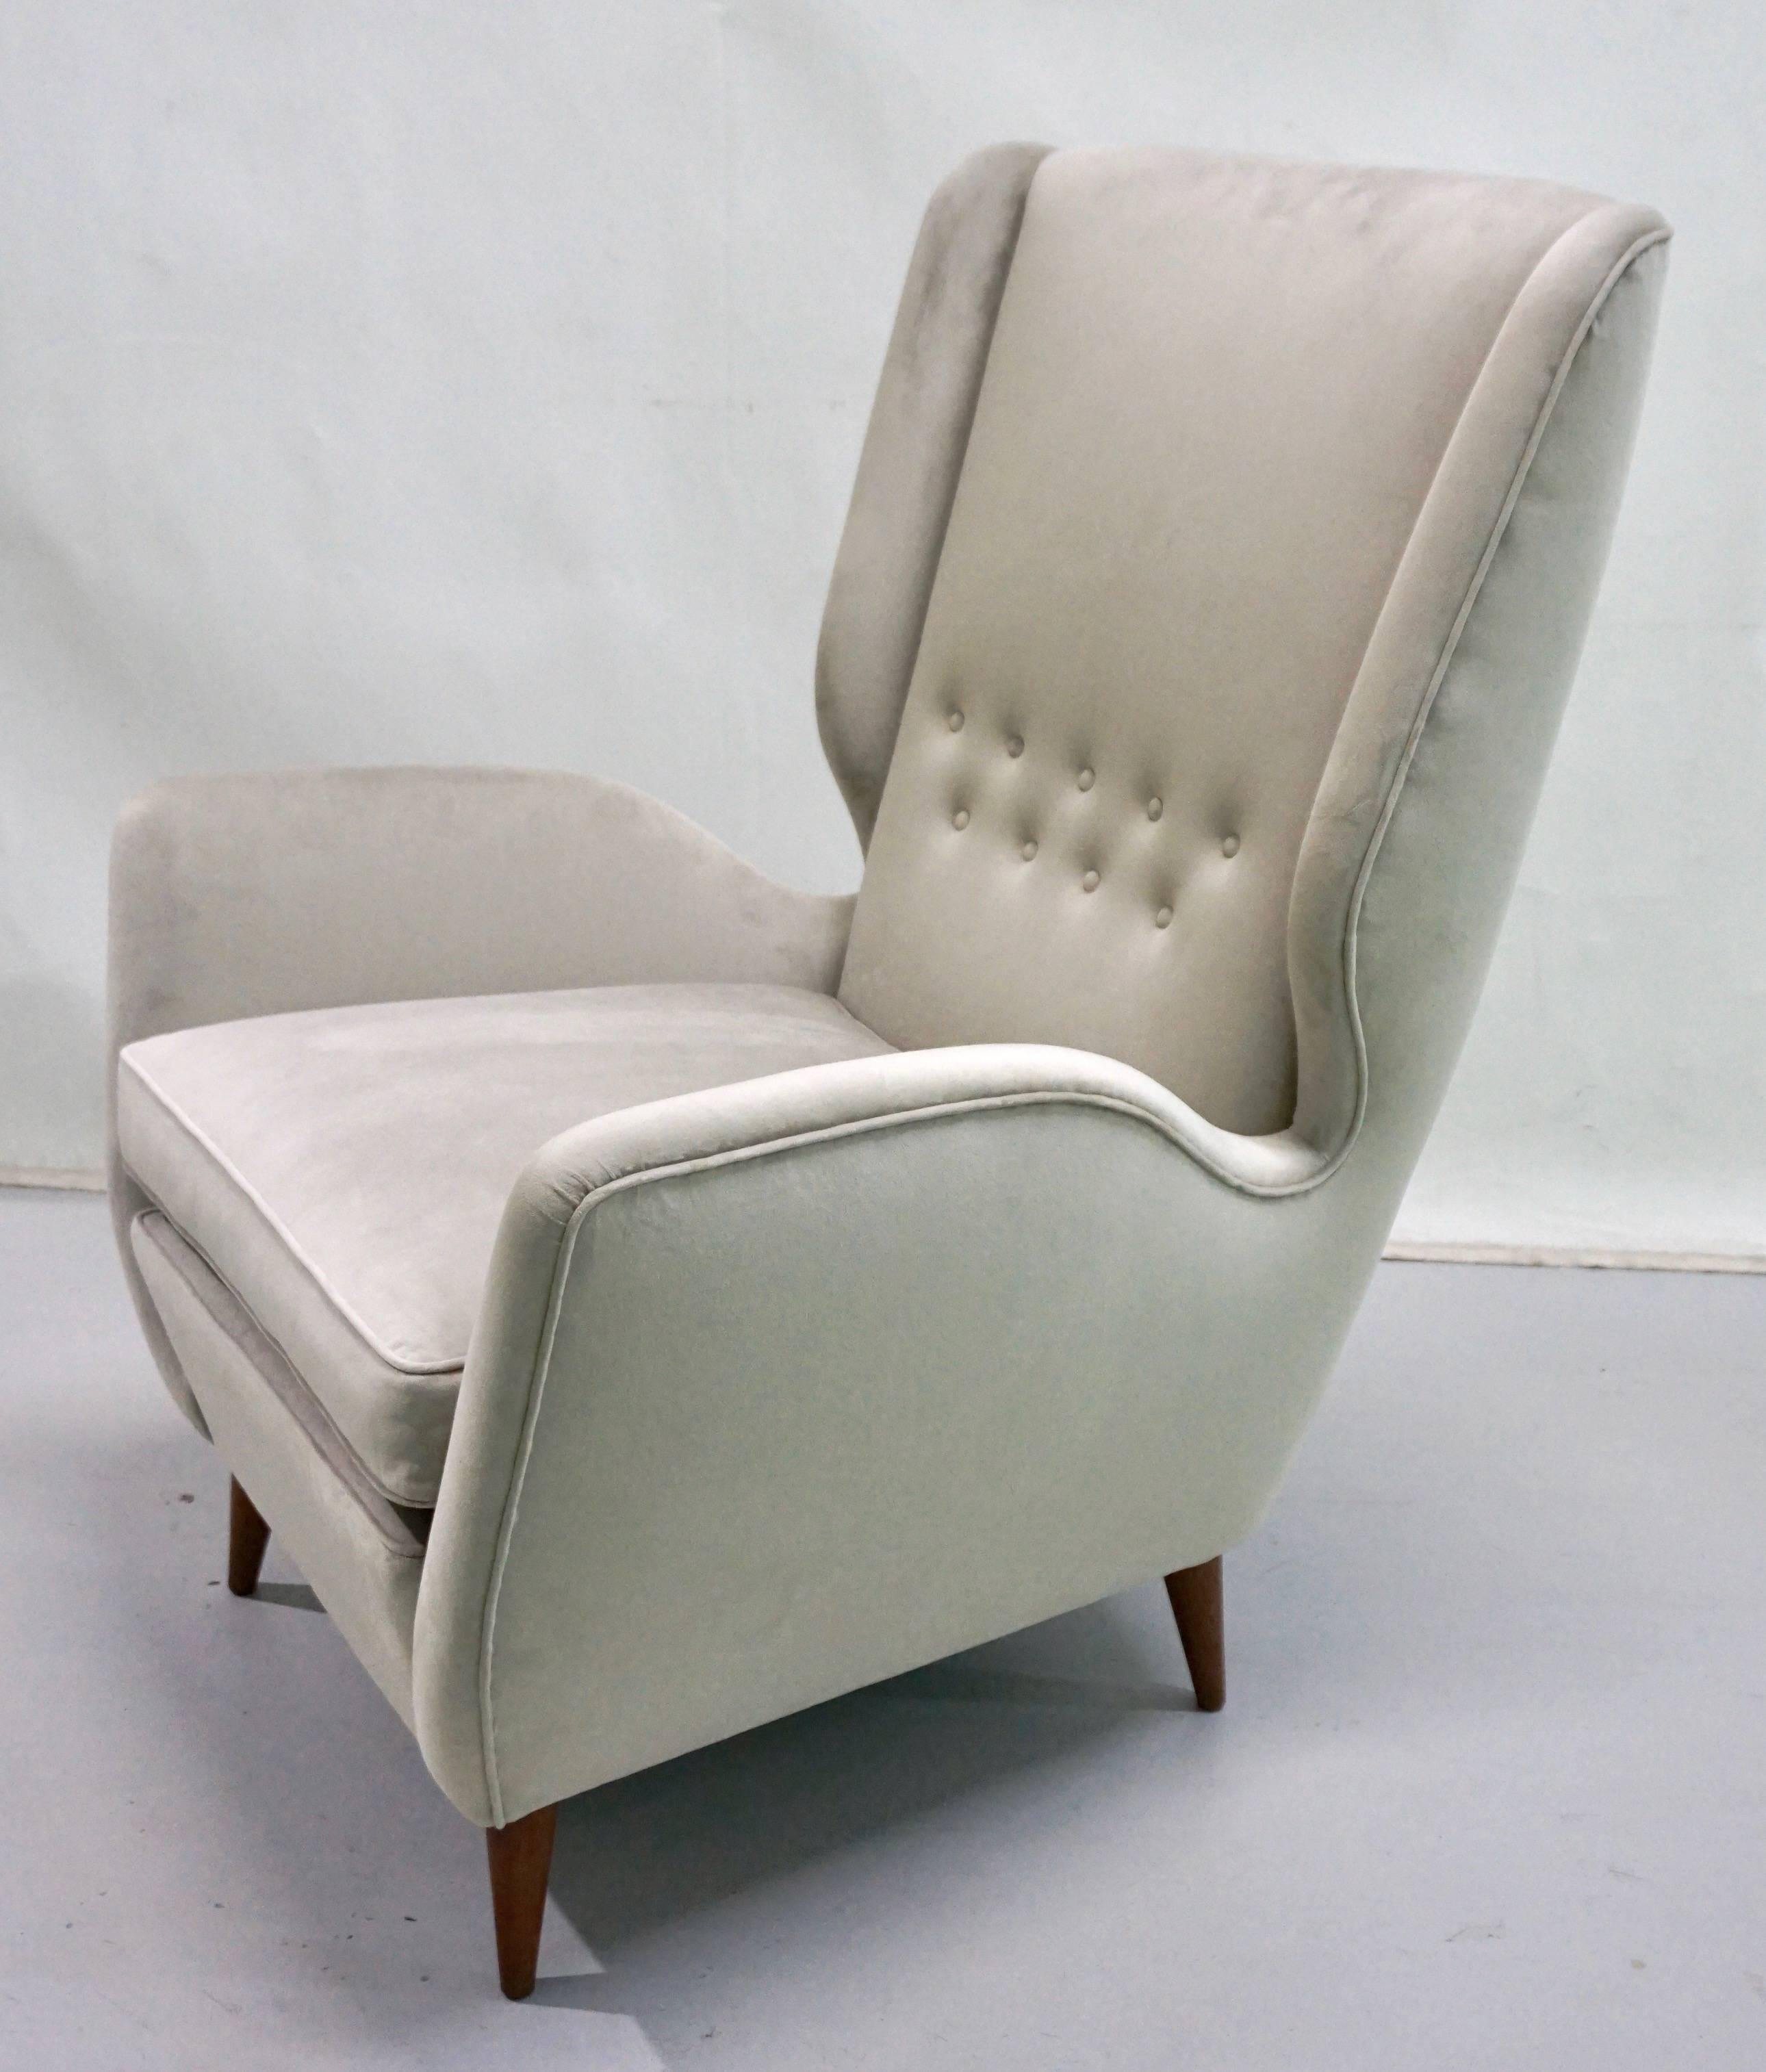 These very comfortable high back armchairs by Gio Ponti, a statement of elegance and modern Italian Design, have very clean cut aerodynamic lines with very chic indented sides and slightly folded button-tufted back, raised on walnut legs. They are